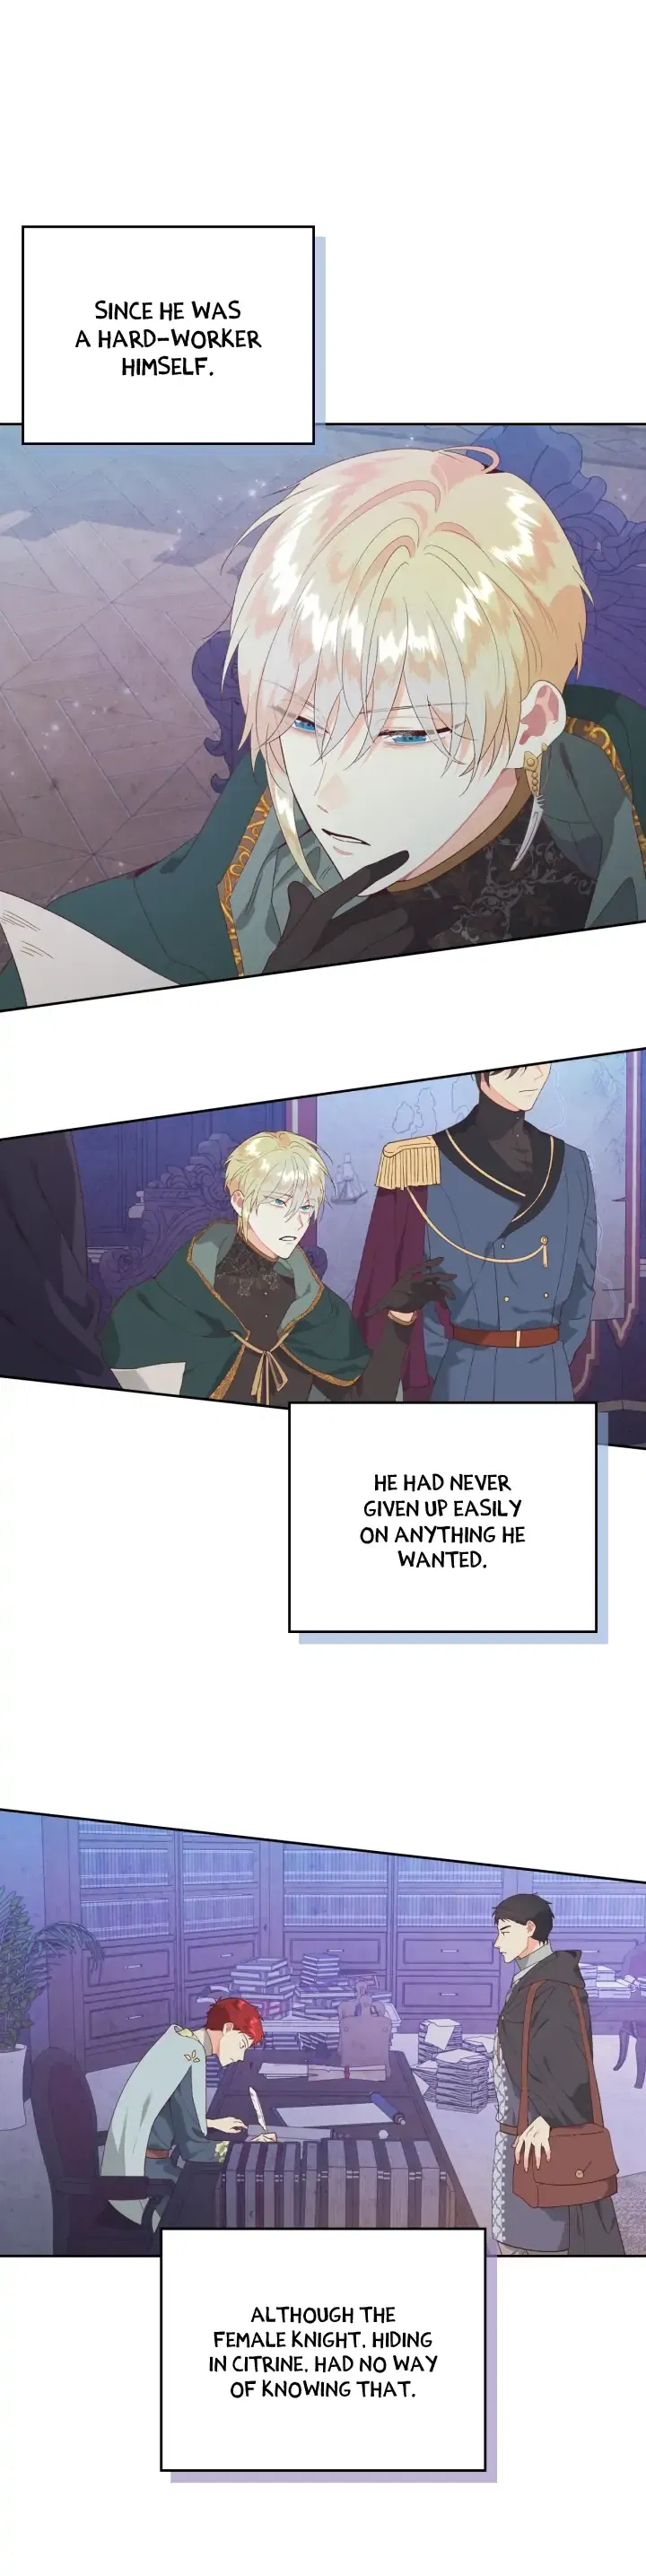 Emperor And The Female Knight Chapter 191 page 25